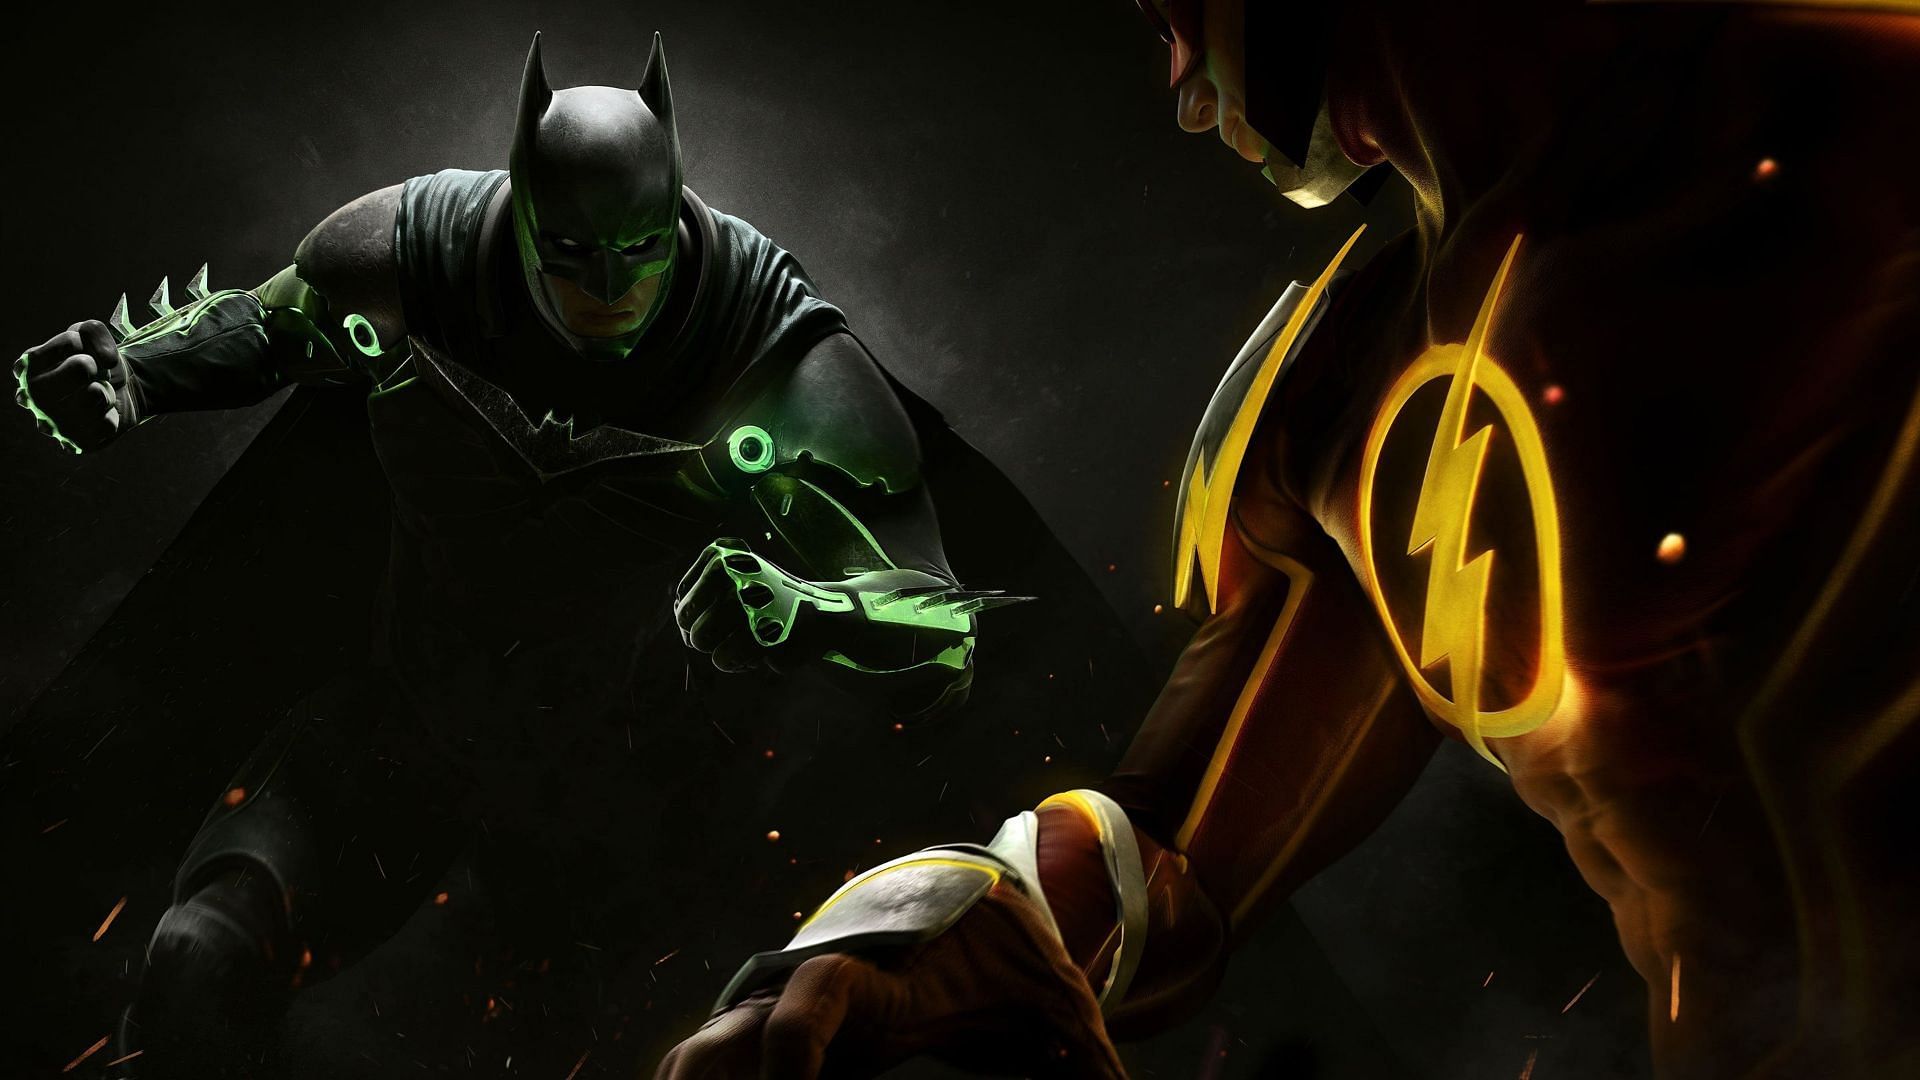 Injustice tells one of the most intriguing stories revolving around the superheroes in DC (Image via Warner Bros)